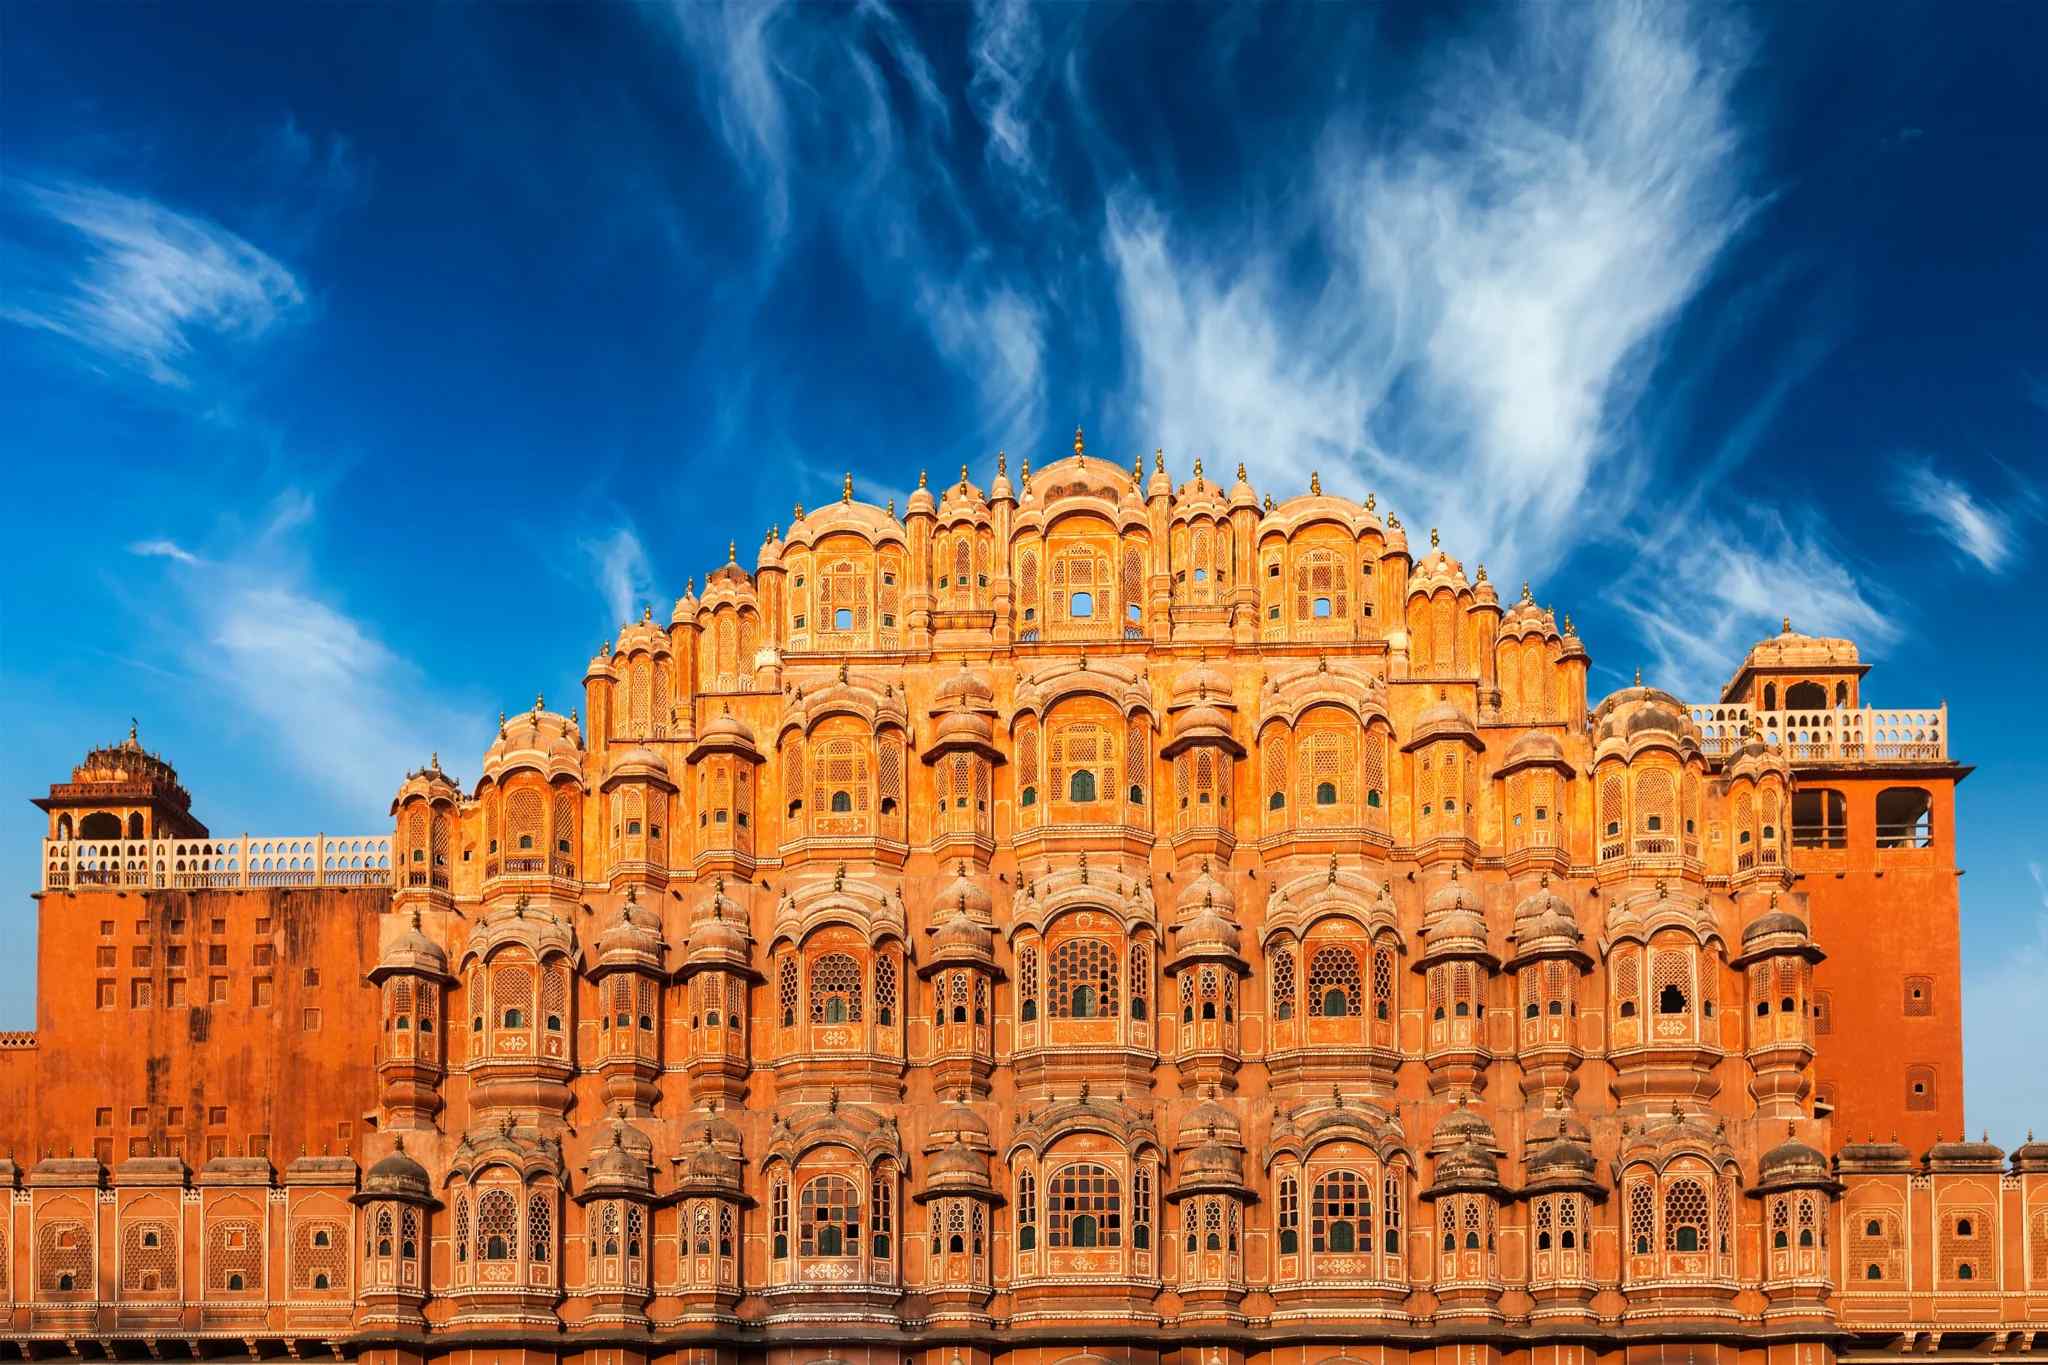 Hawa Mahal in Jaipur, known as the Pink City